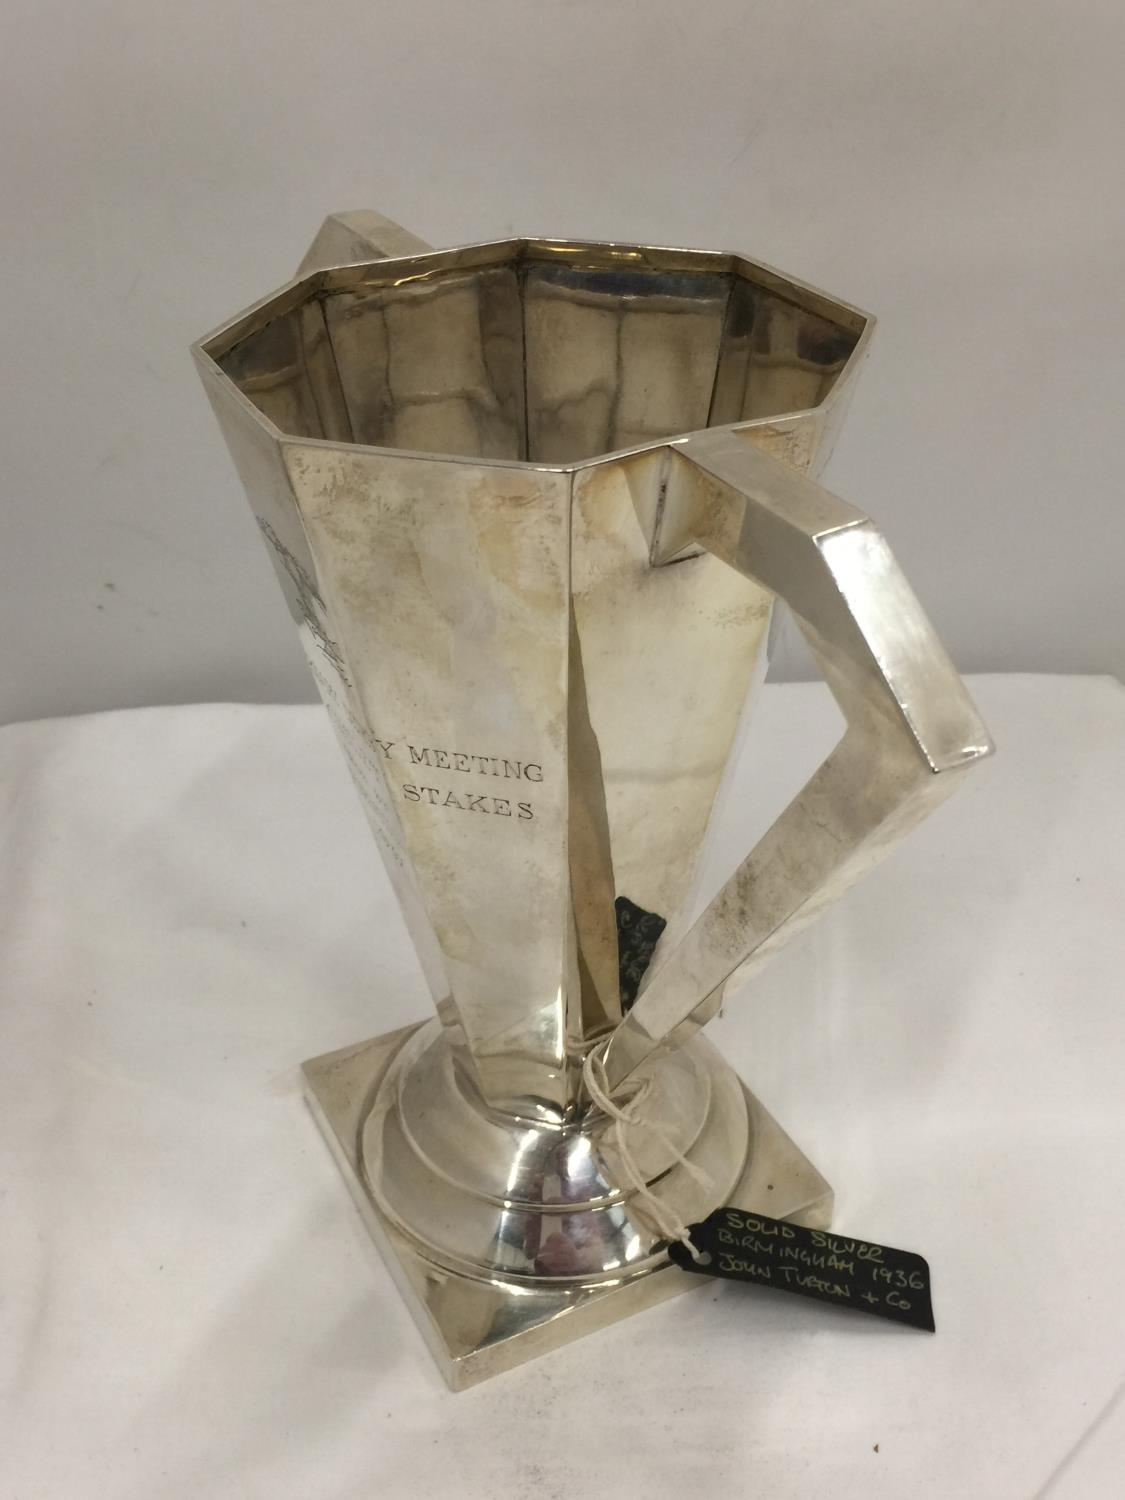 A SILVER ART DECO STYLE GREYHOUND RACING TROPHY ENGRAVED 10TH ANNIVERSARY DERBY MEETING WON BY - Image 3 of 8